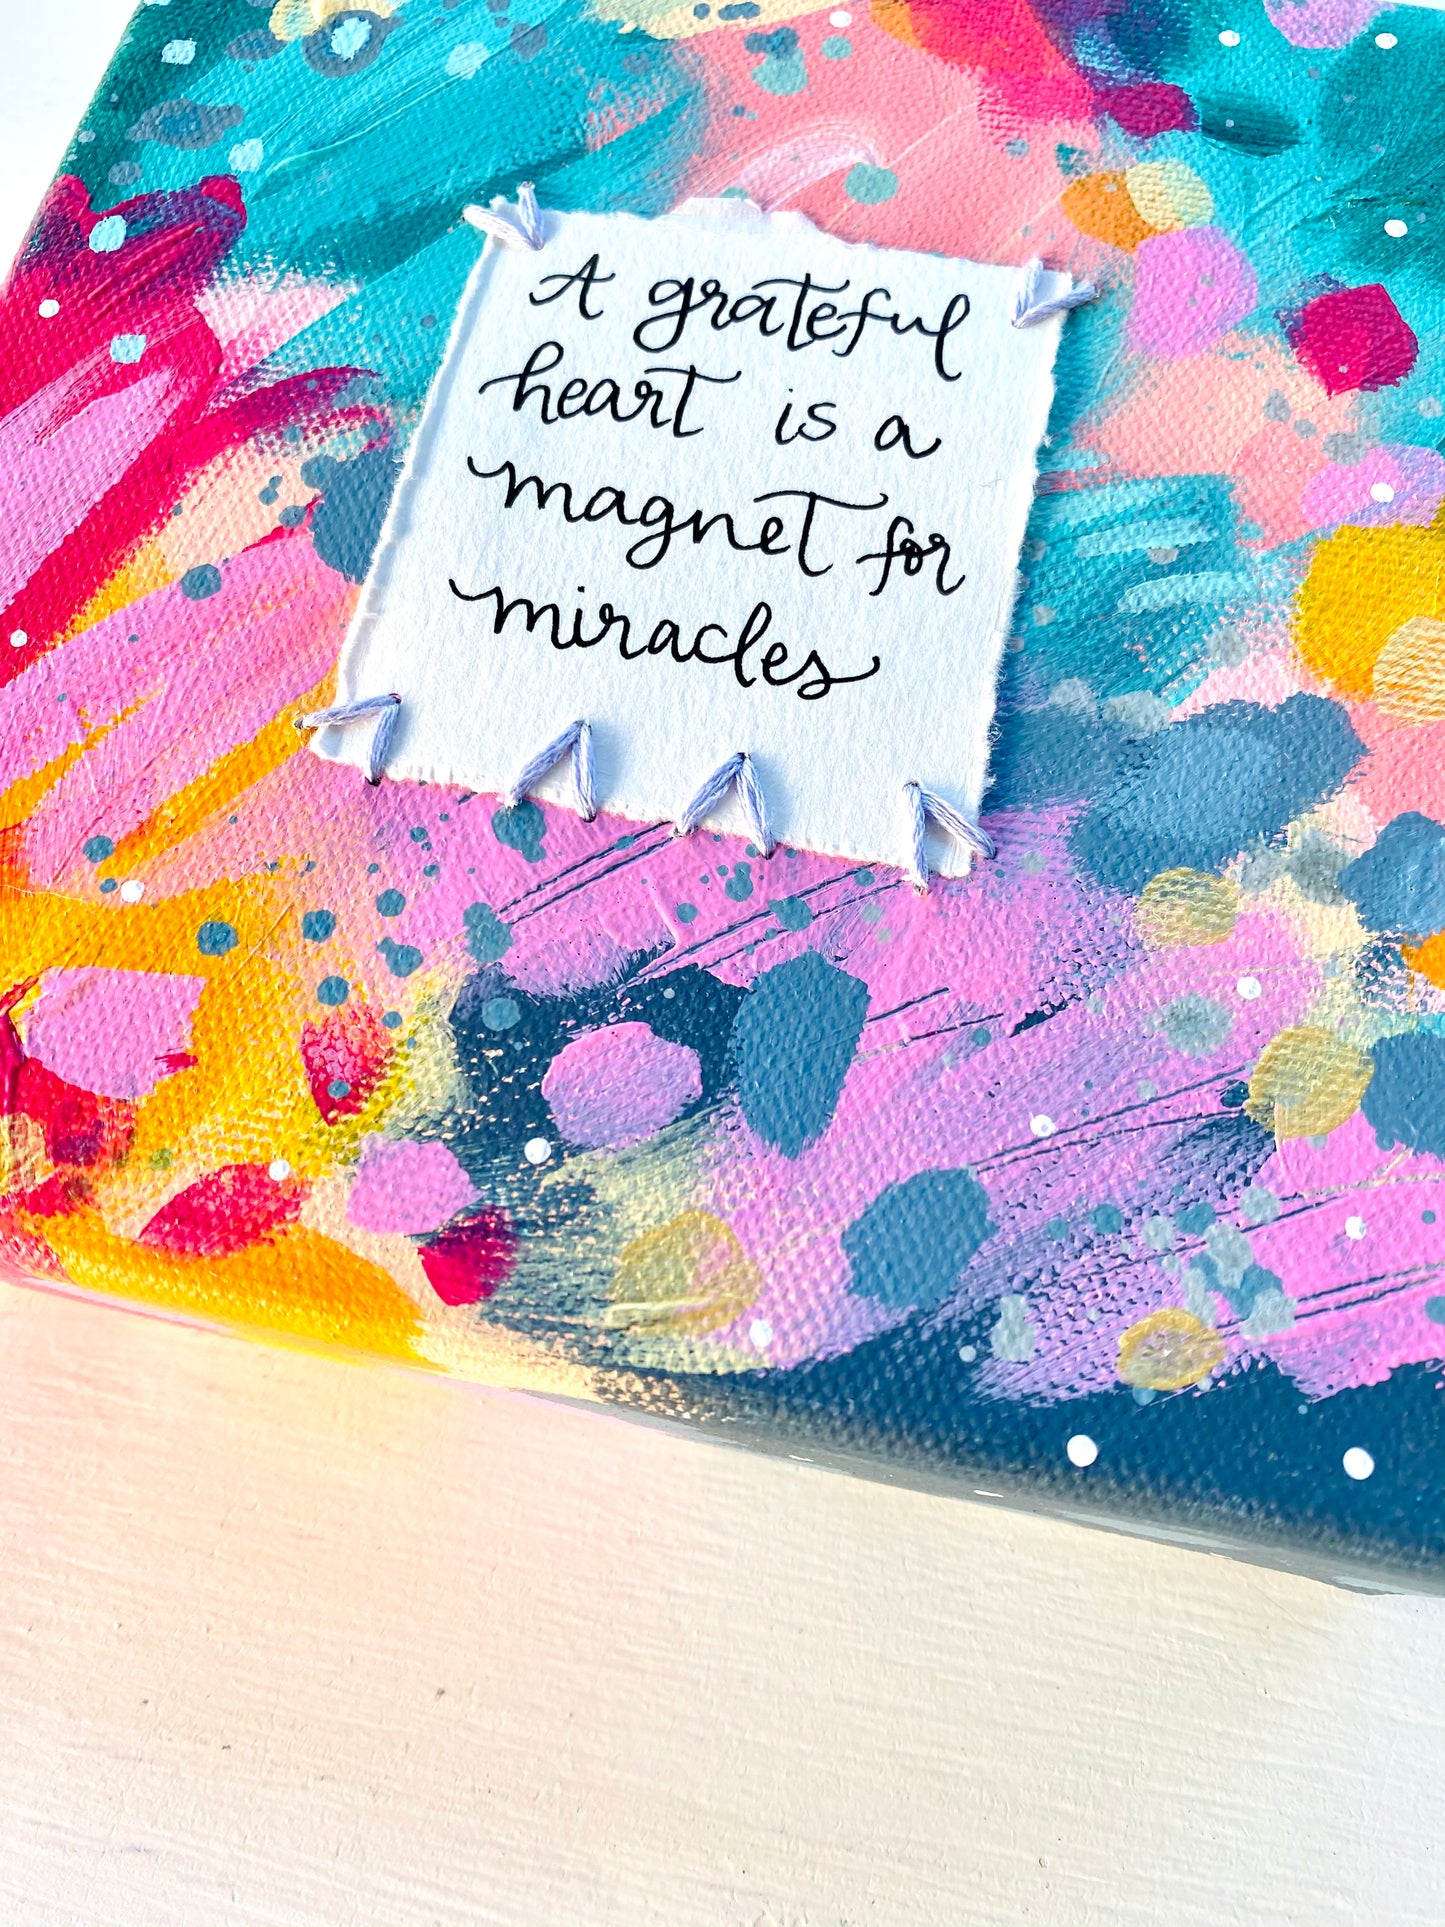 Grateful Heart 6x6 inch original abstract canvas with embroidery thread accents